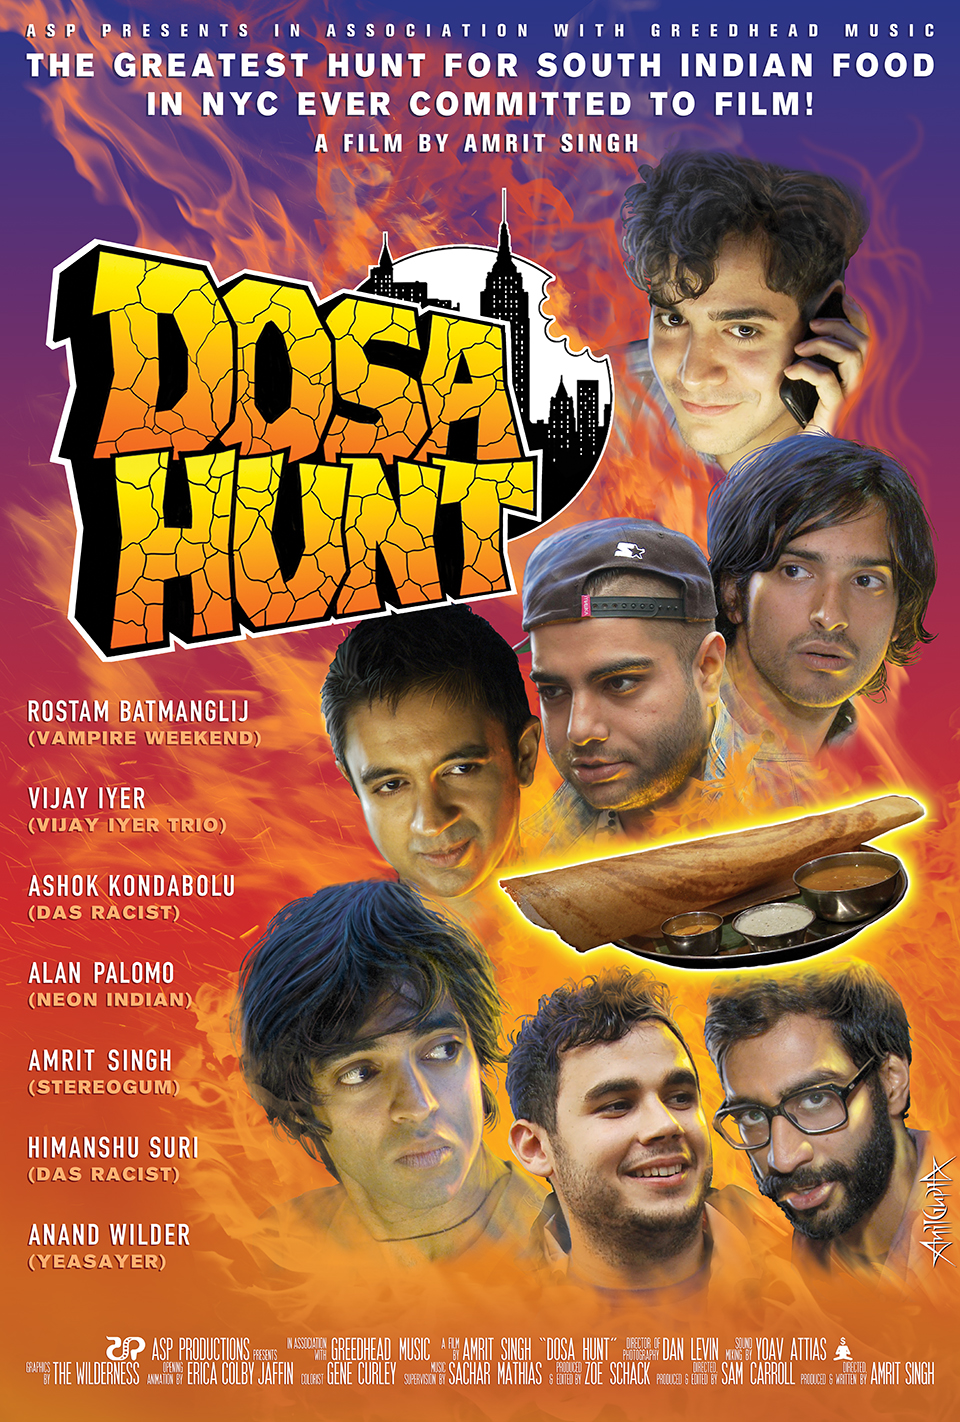 Official poster for DOSA HUNT, A Film By Amrit Singh.